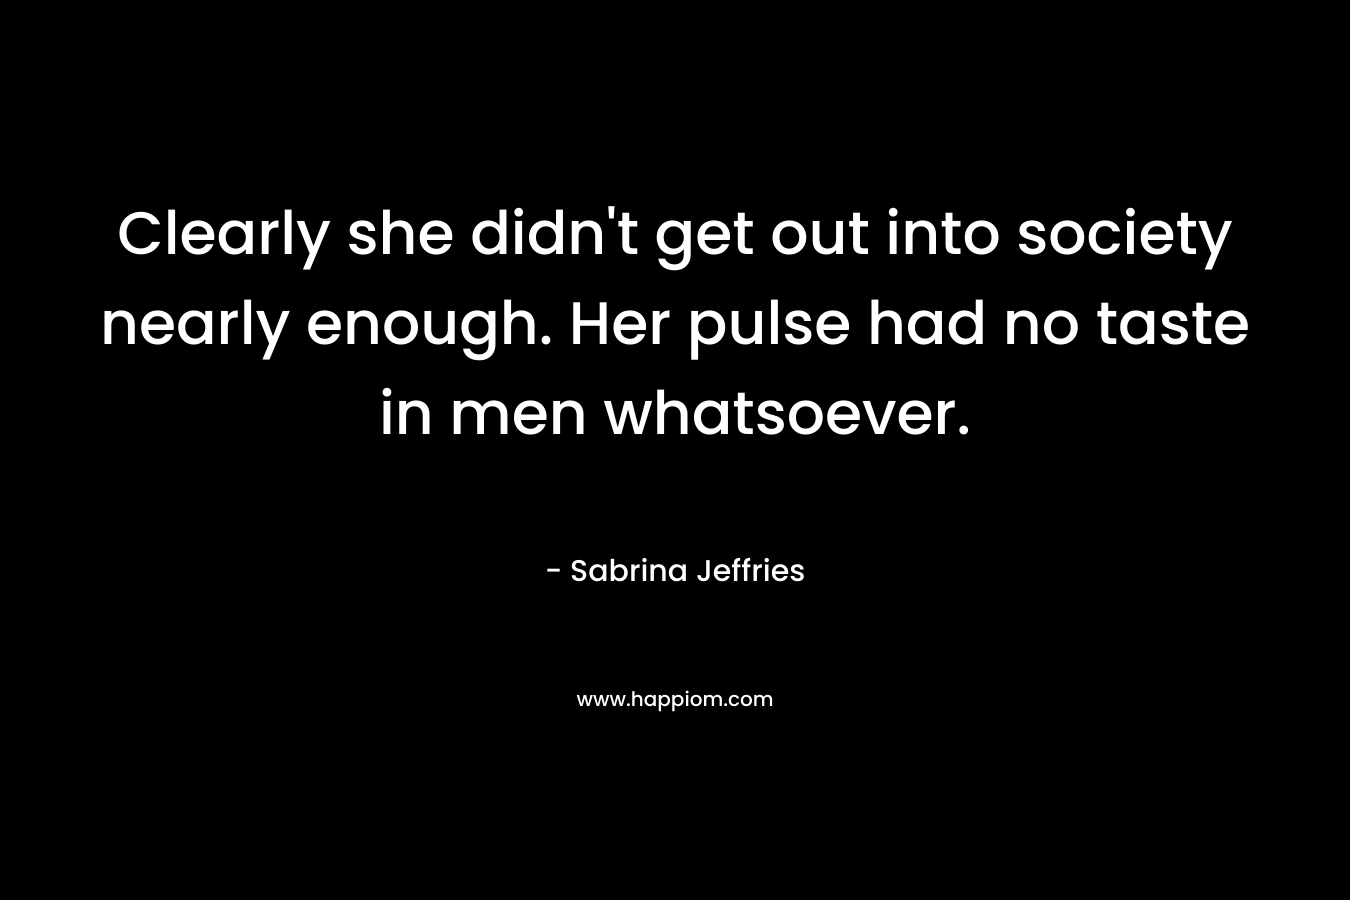 Clearly she didn’t get out into society nearly enough. Her pulse had no taste in men whatsoever. – Sabrina Jeffries